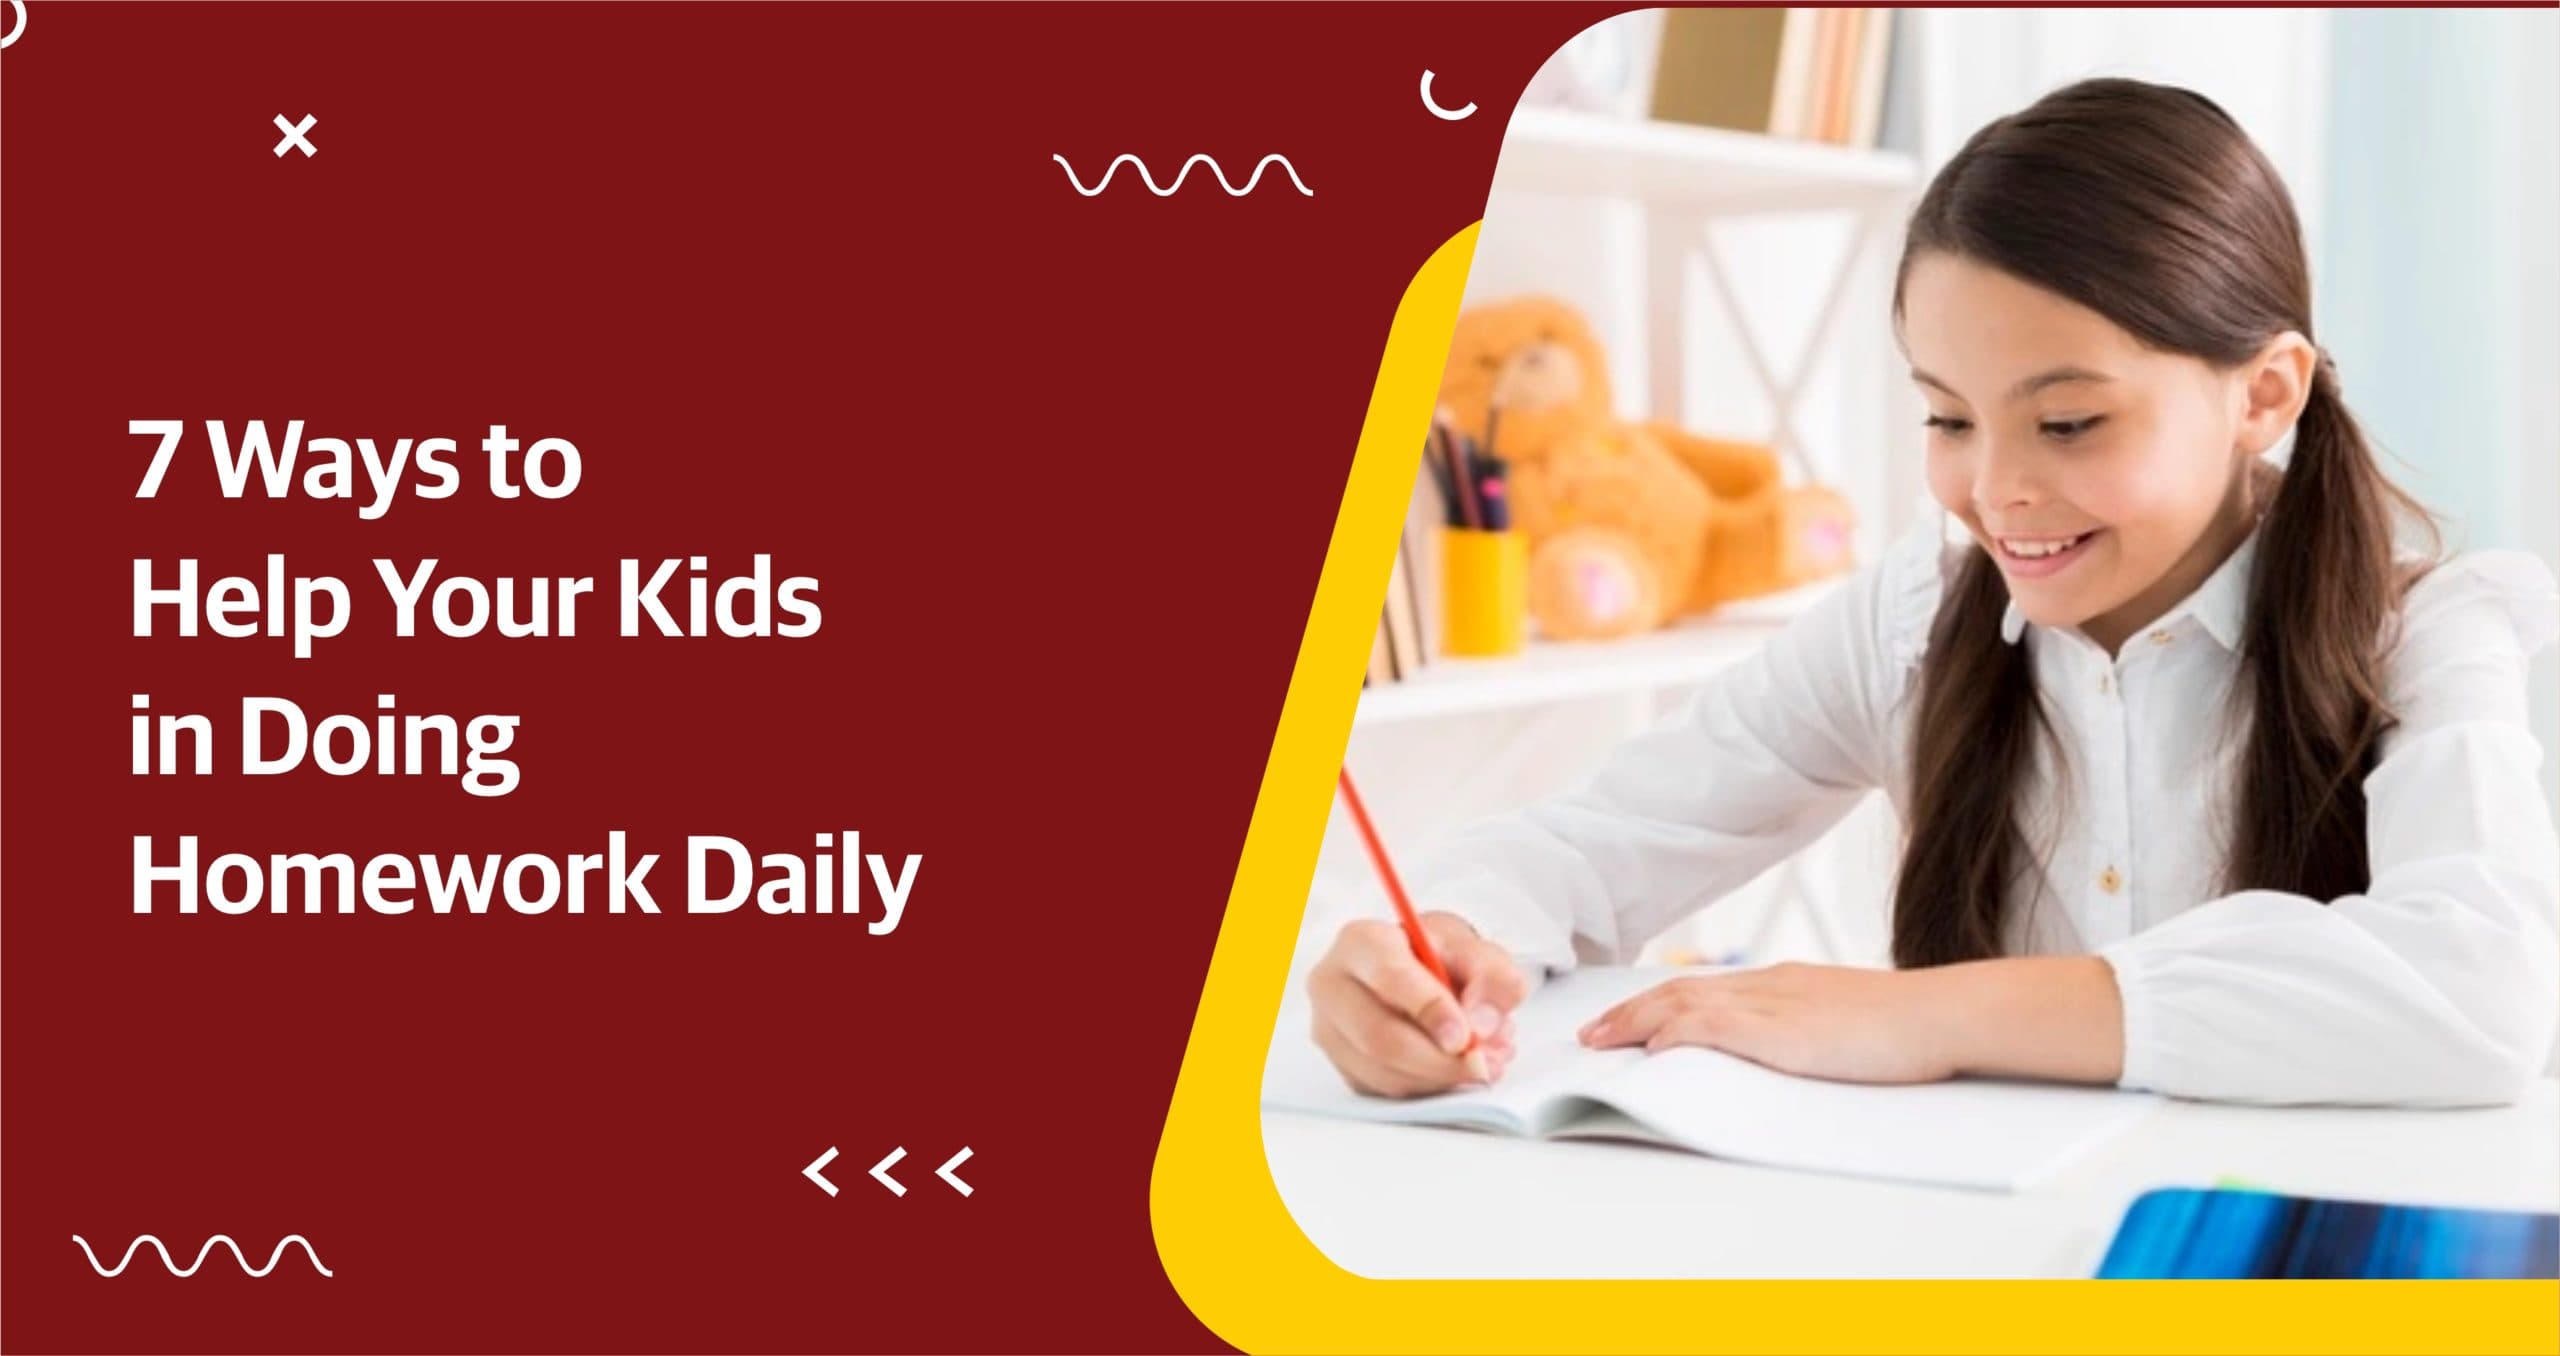 7 Ways to Help Your Kids in Doing Homework Daily